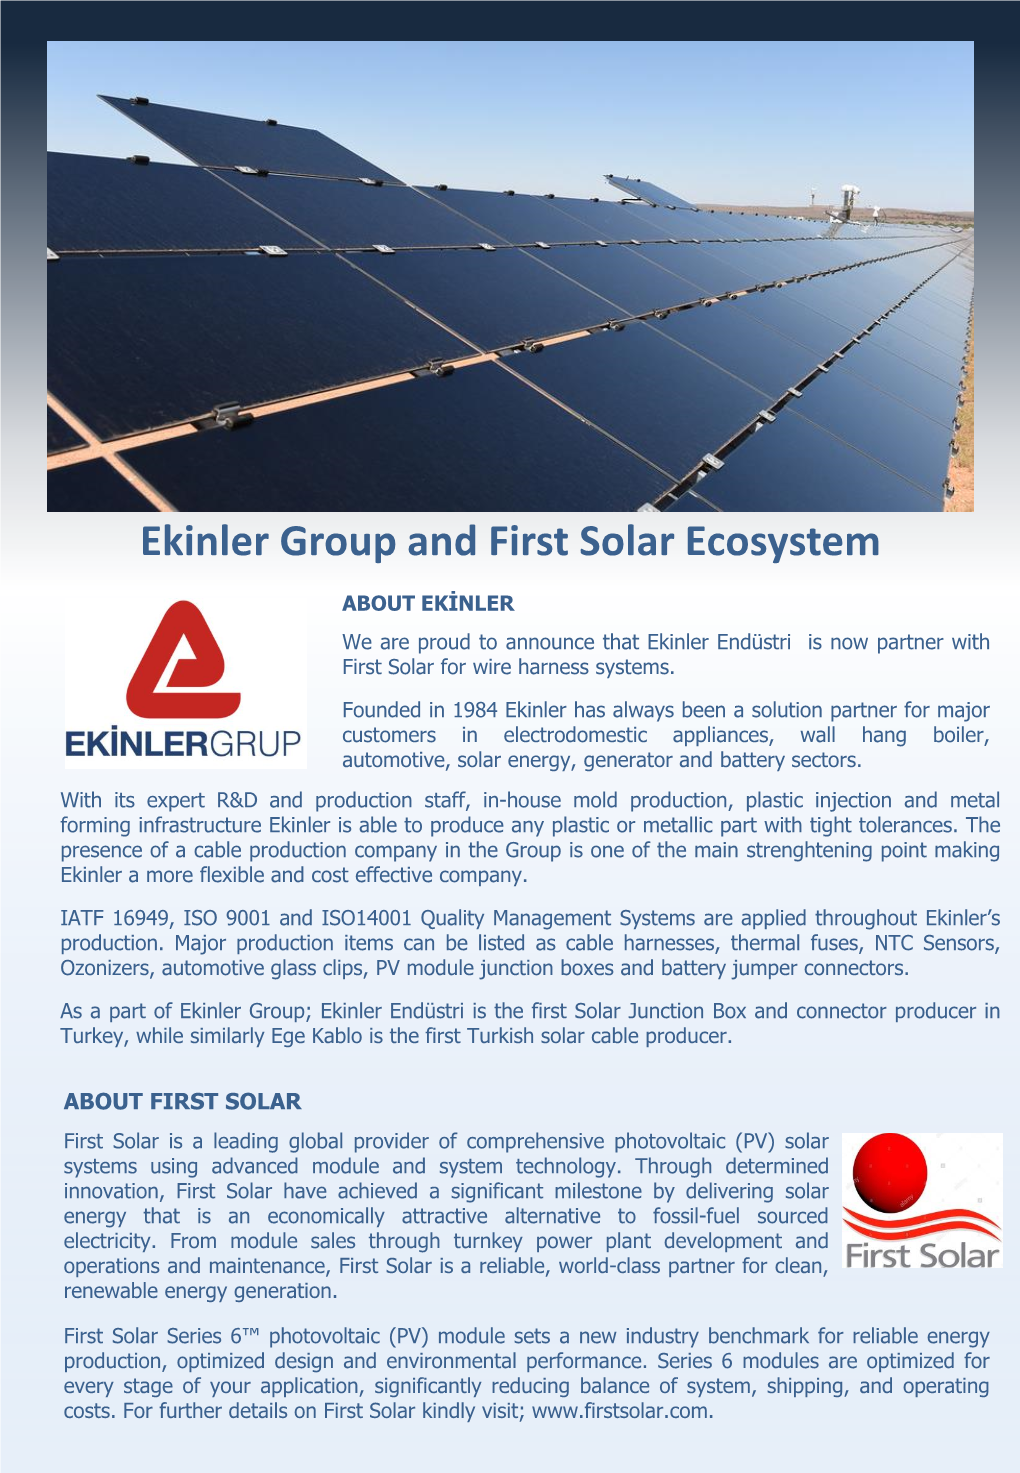 Ekinler Group and First Solar Ecosystem